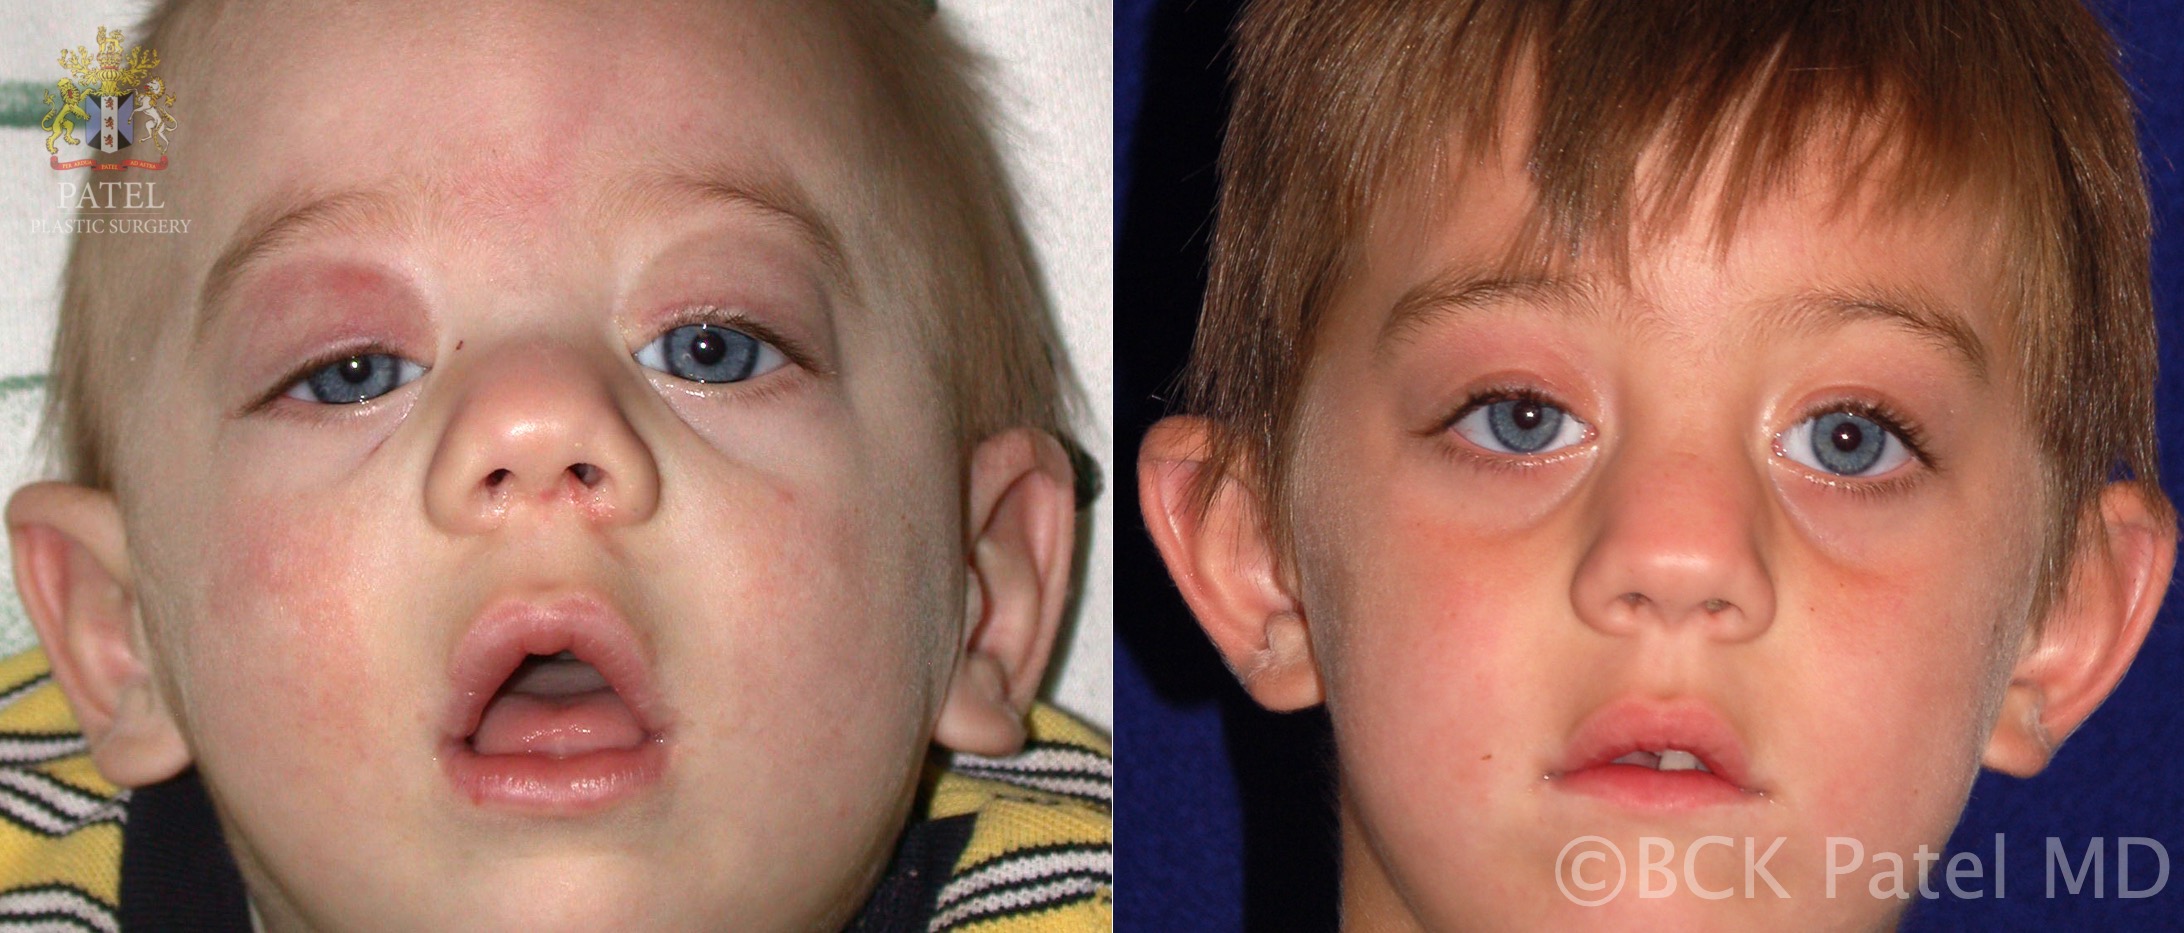 Congenital ptosis: severe bilateral congenital ptosis with the chin-up position and poor levator function with over action of the frontalis muscles. Bilateral frontalis slings corrects the eyelid position and the chin-up position